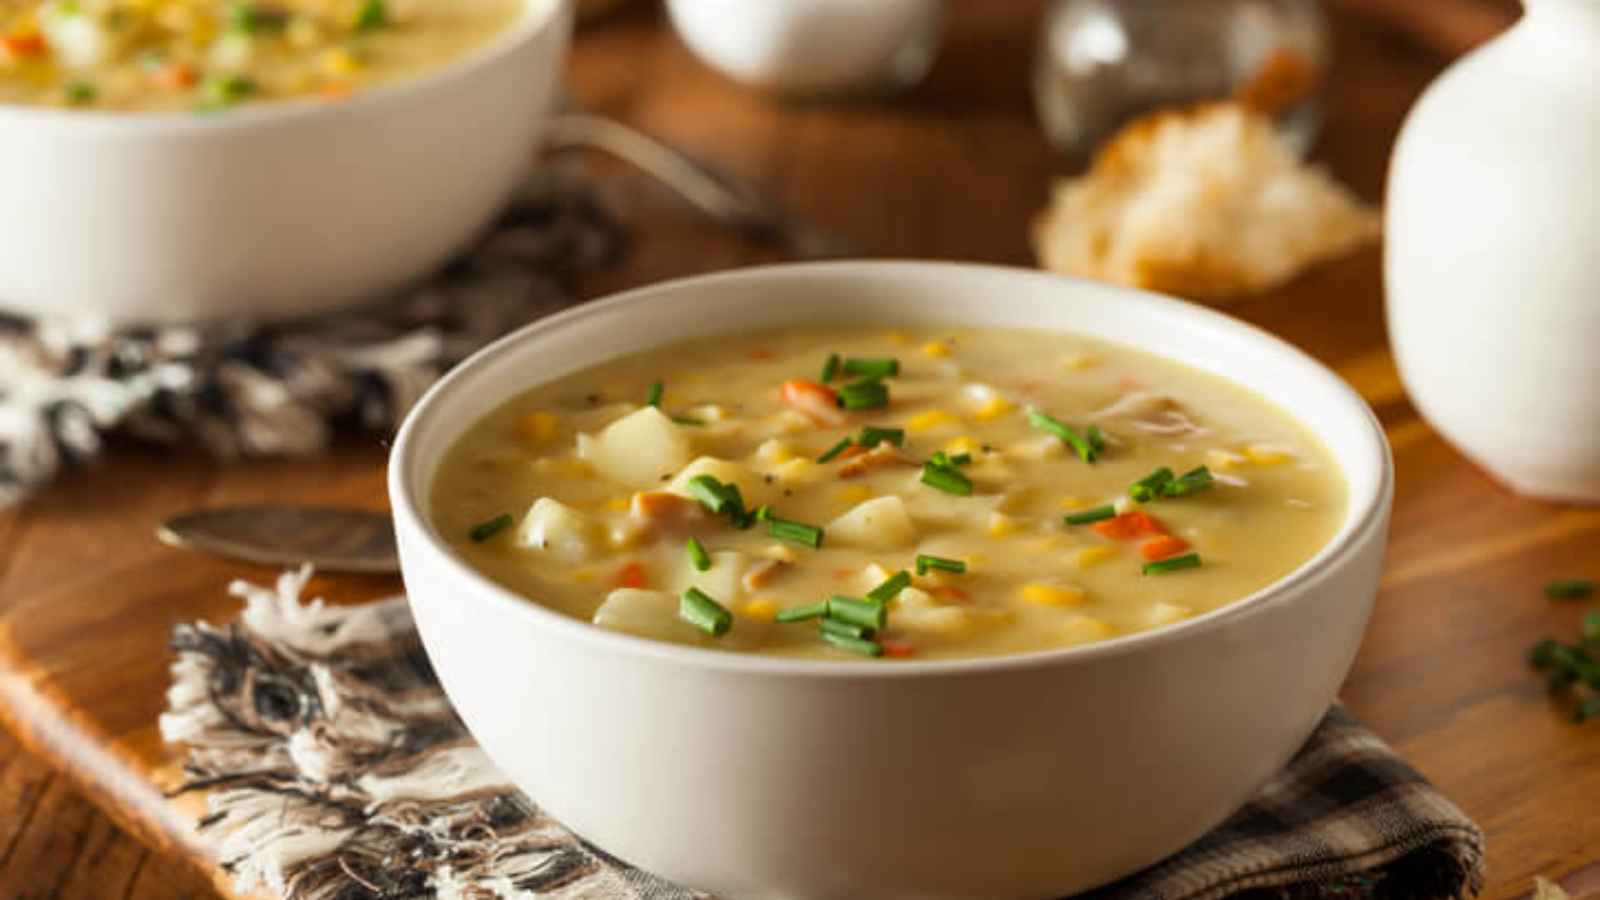 National Homemade Soup Day 2023: Date, History, How to Celebrate